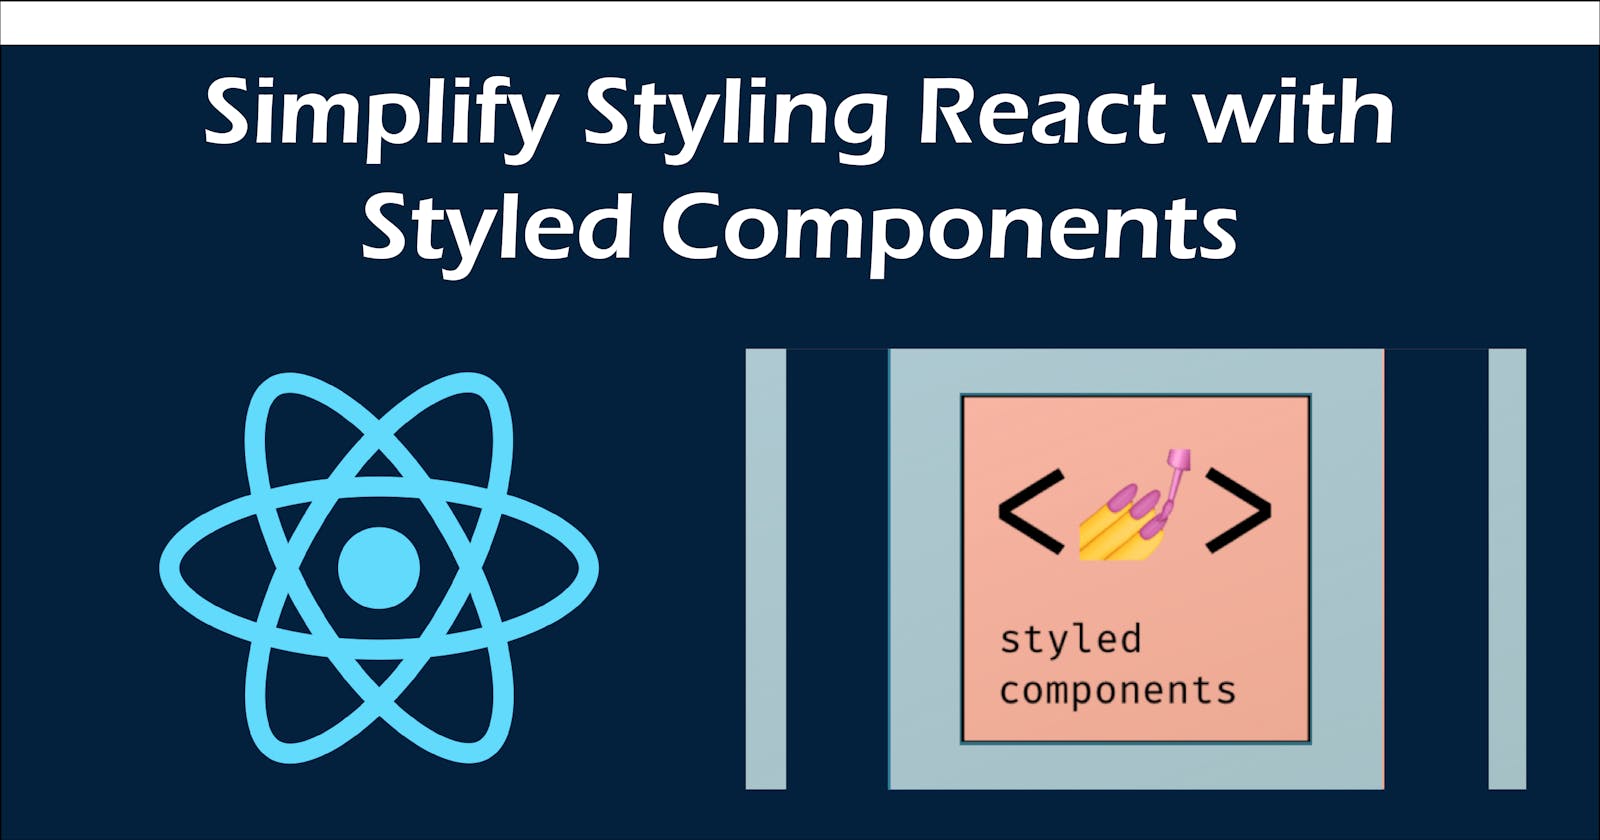 Simplify Styling React with Styled Components